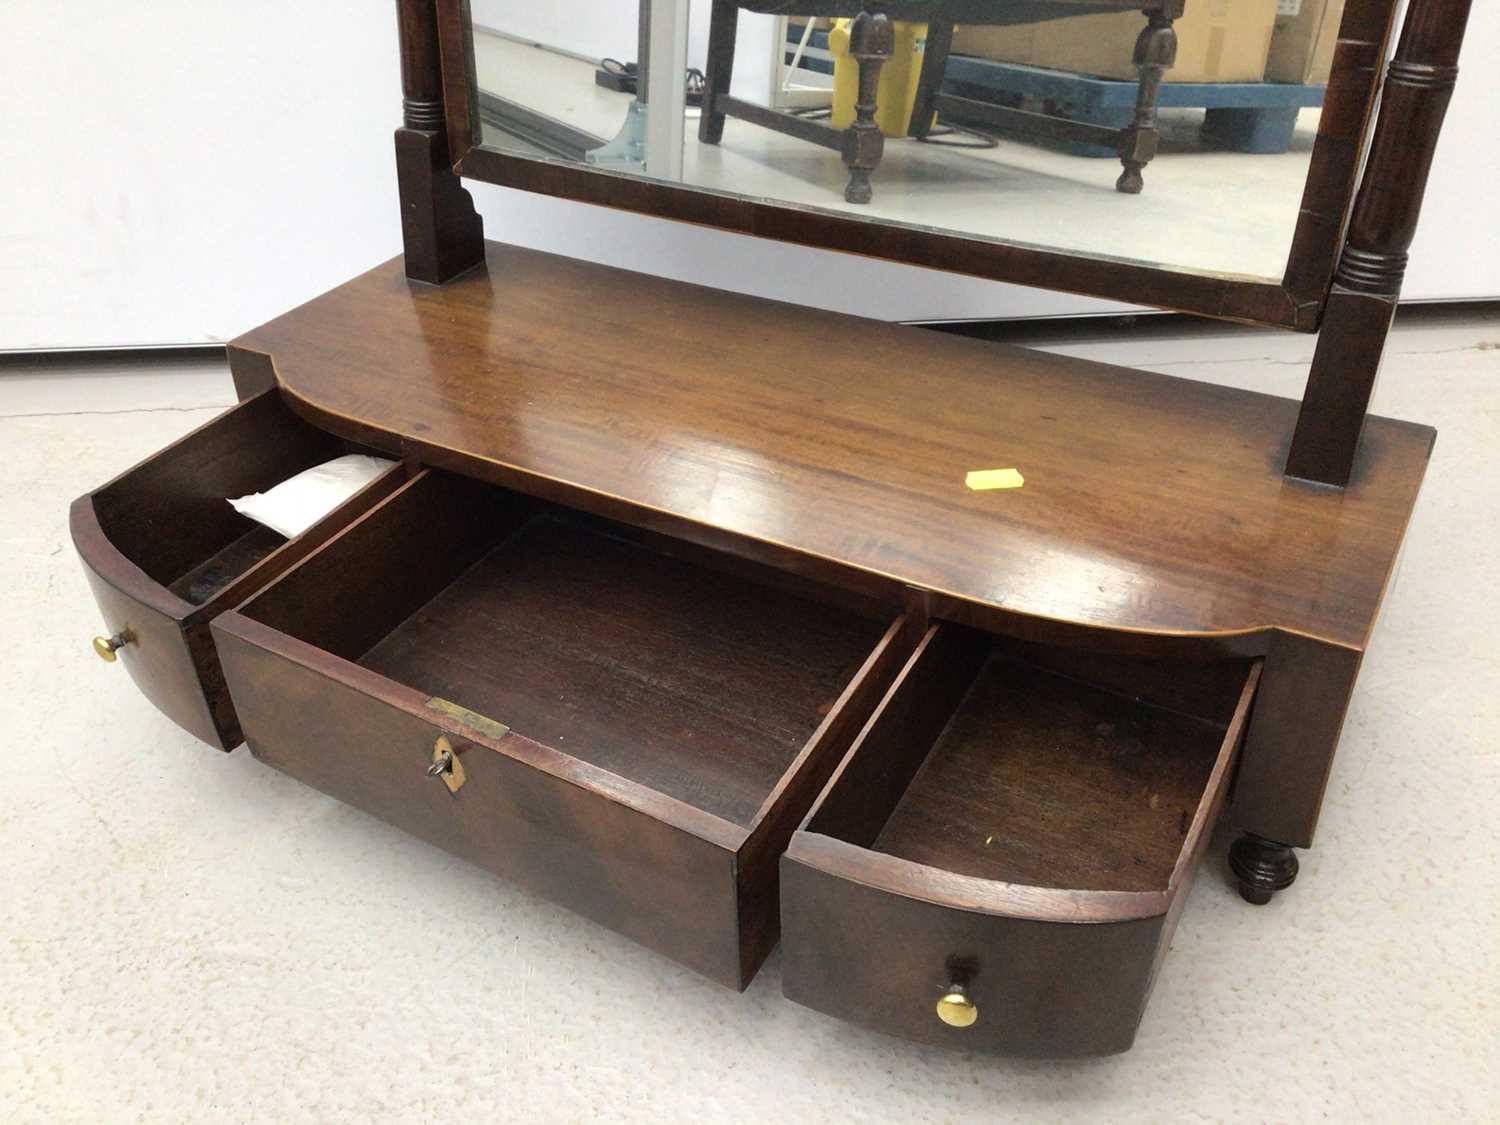 19th century mahogany toilet mirror with three drawers below on turned legs, 59cm wide x 65.5cm high - Image 5 of 5